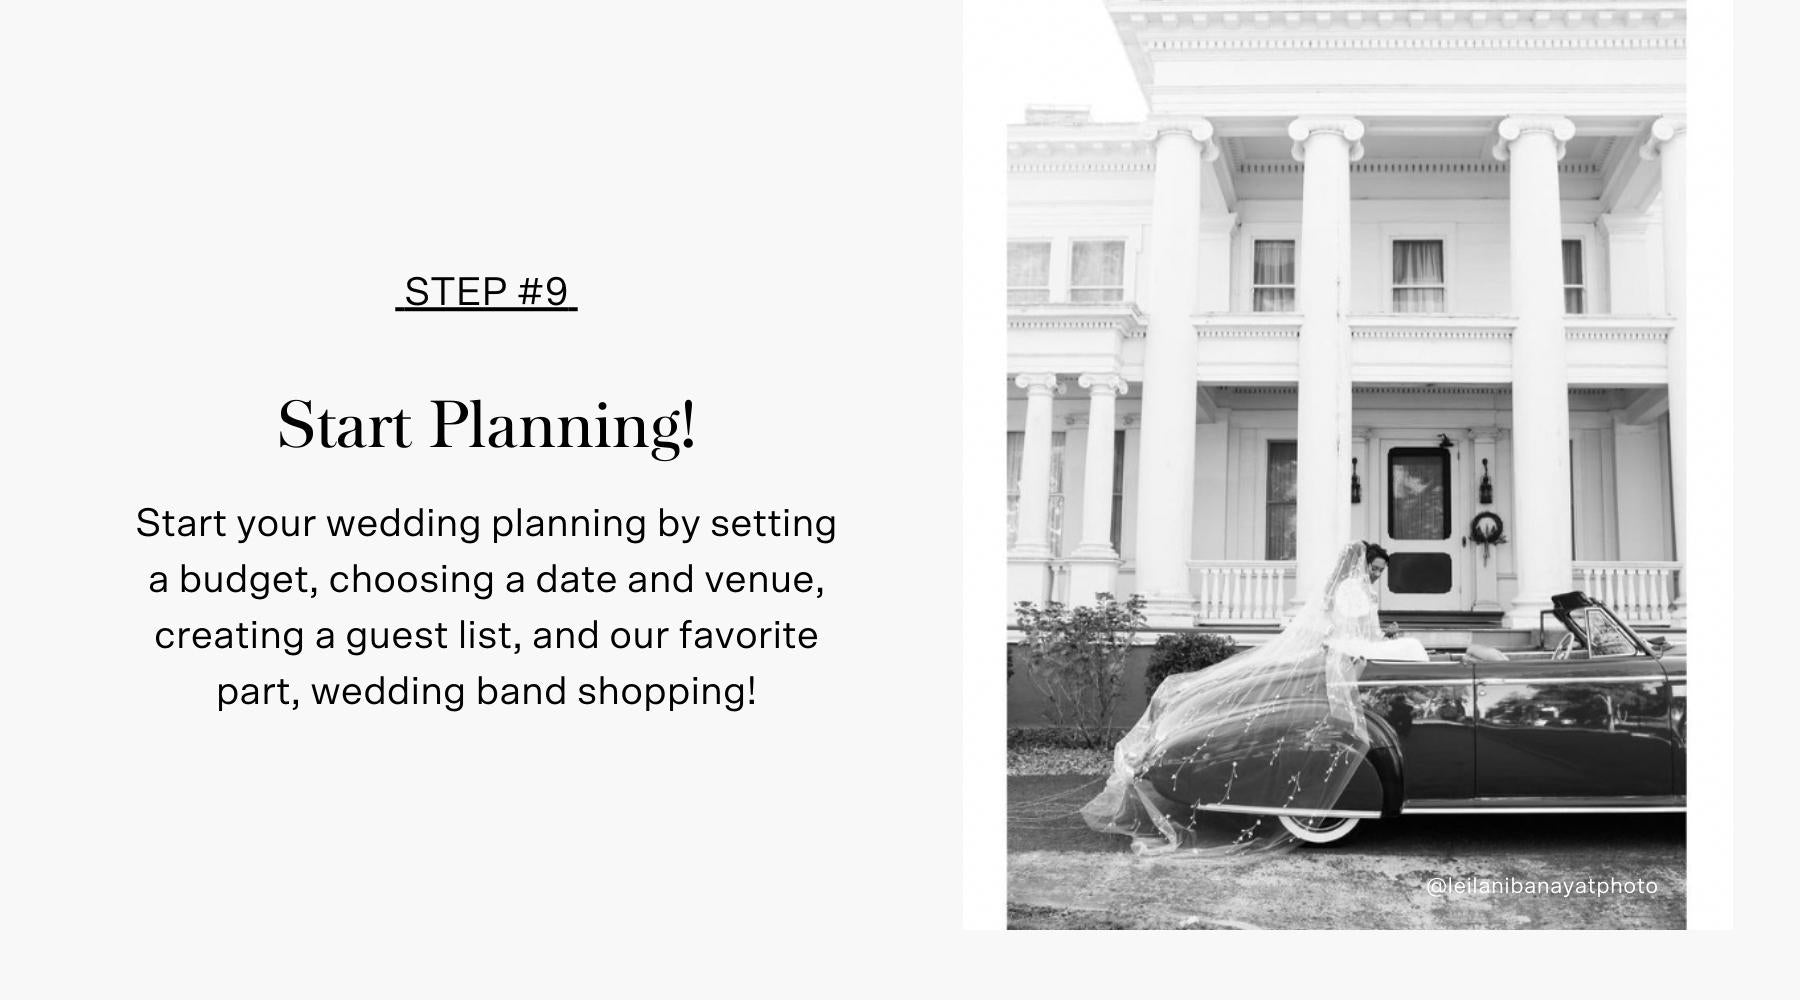 Steps to wedding planning